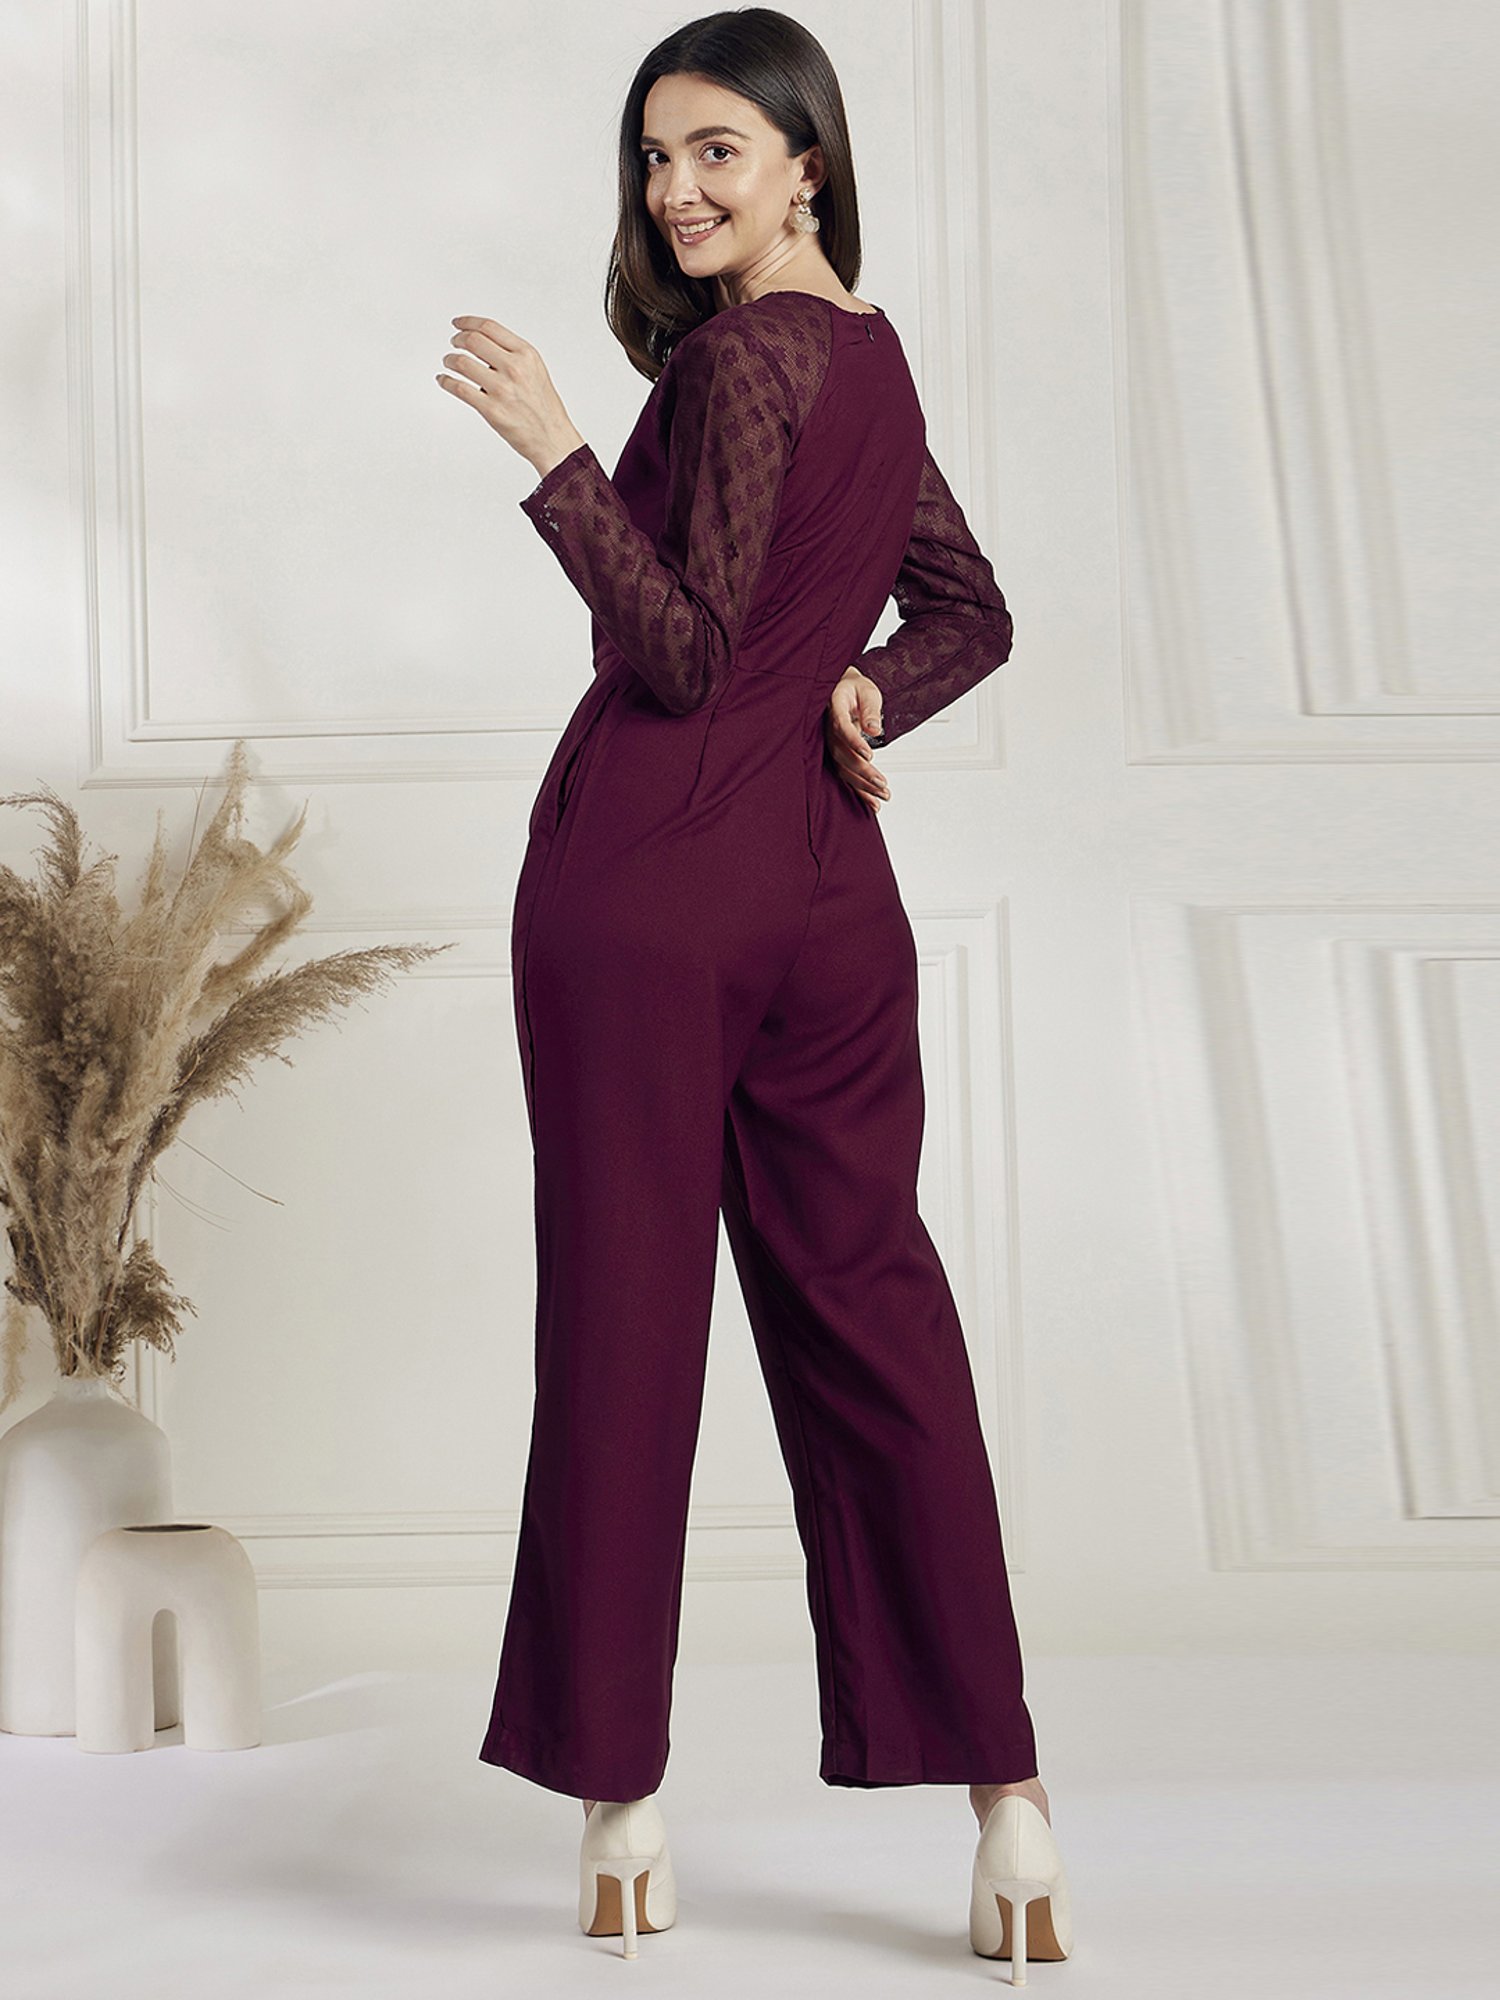 Toast To You Dusty Purple Flutter Sleeve Cutout Jumpsuit at Rs 1999.00, Women Jumpsuit, Ladies Jumpsuits, जंपसूट - Pink Fabb, Delhi